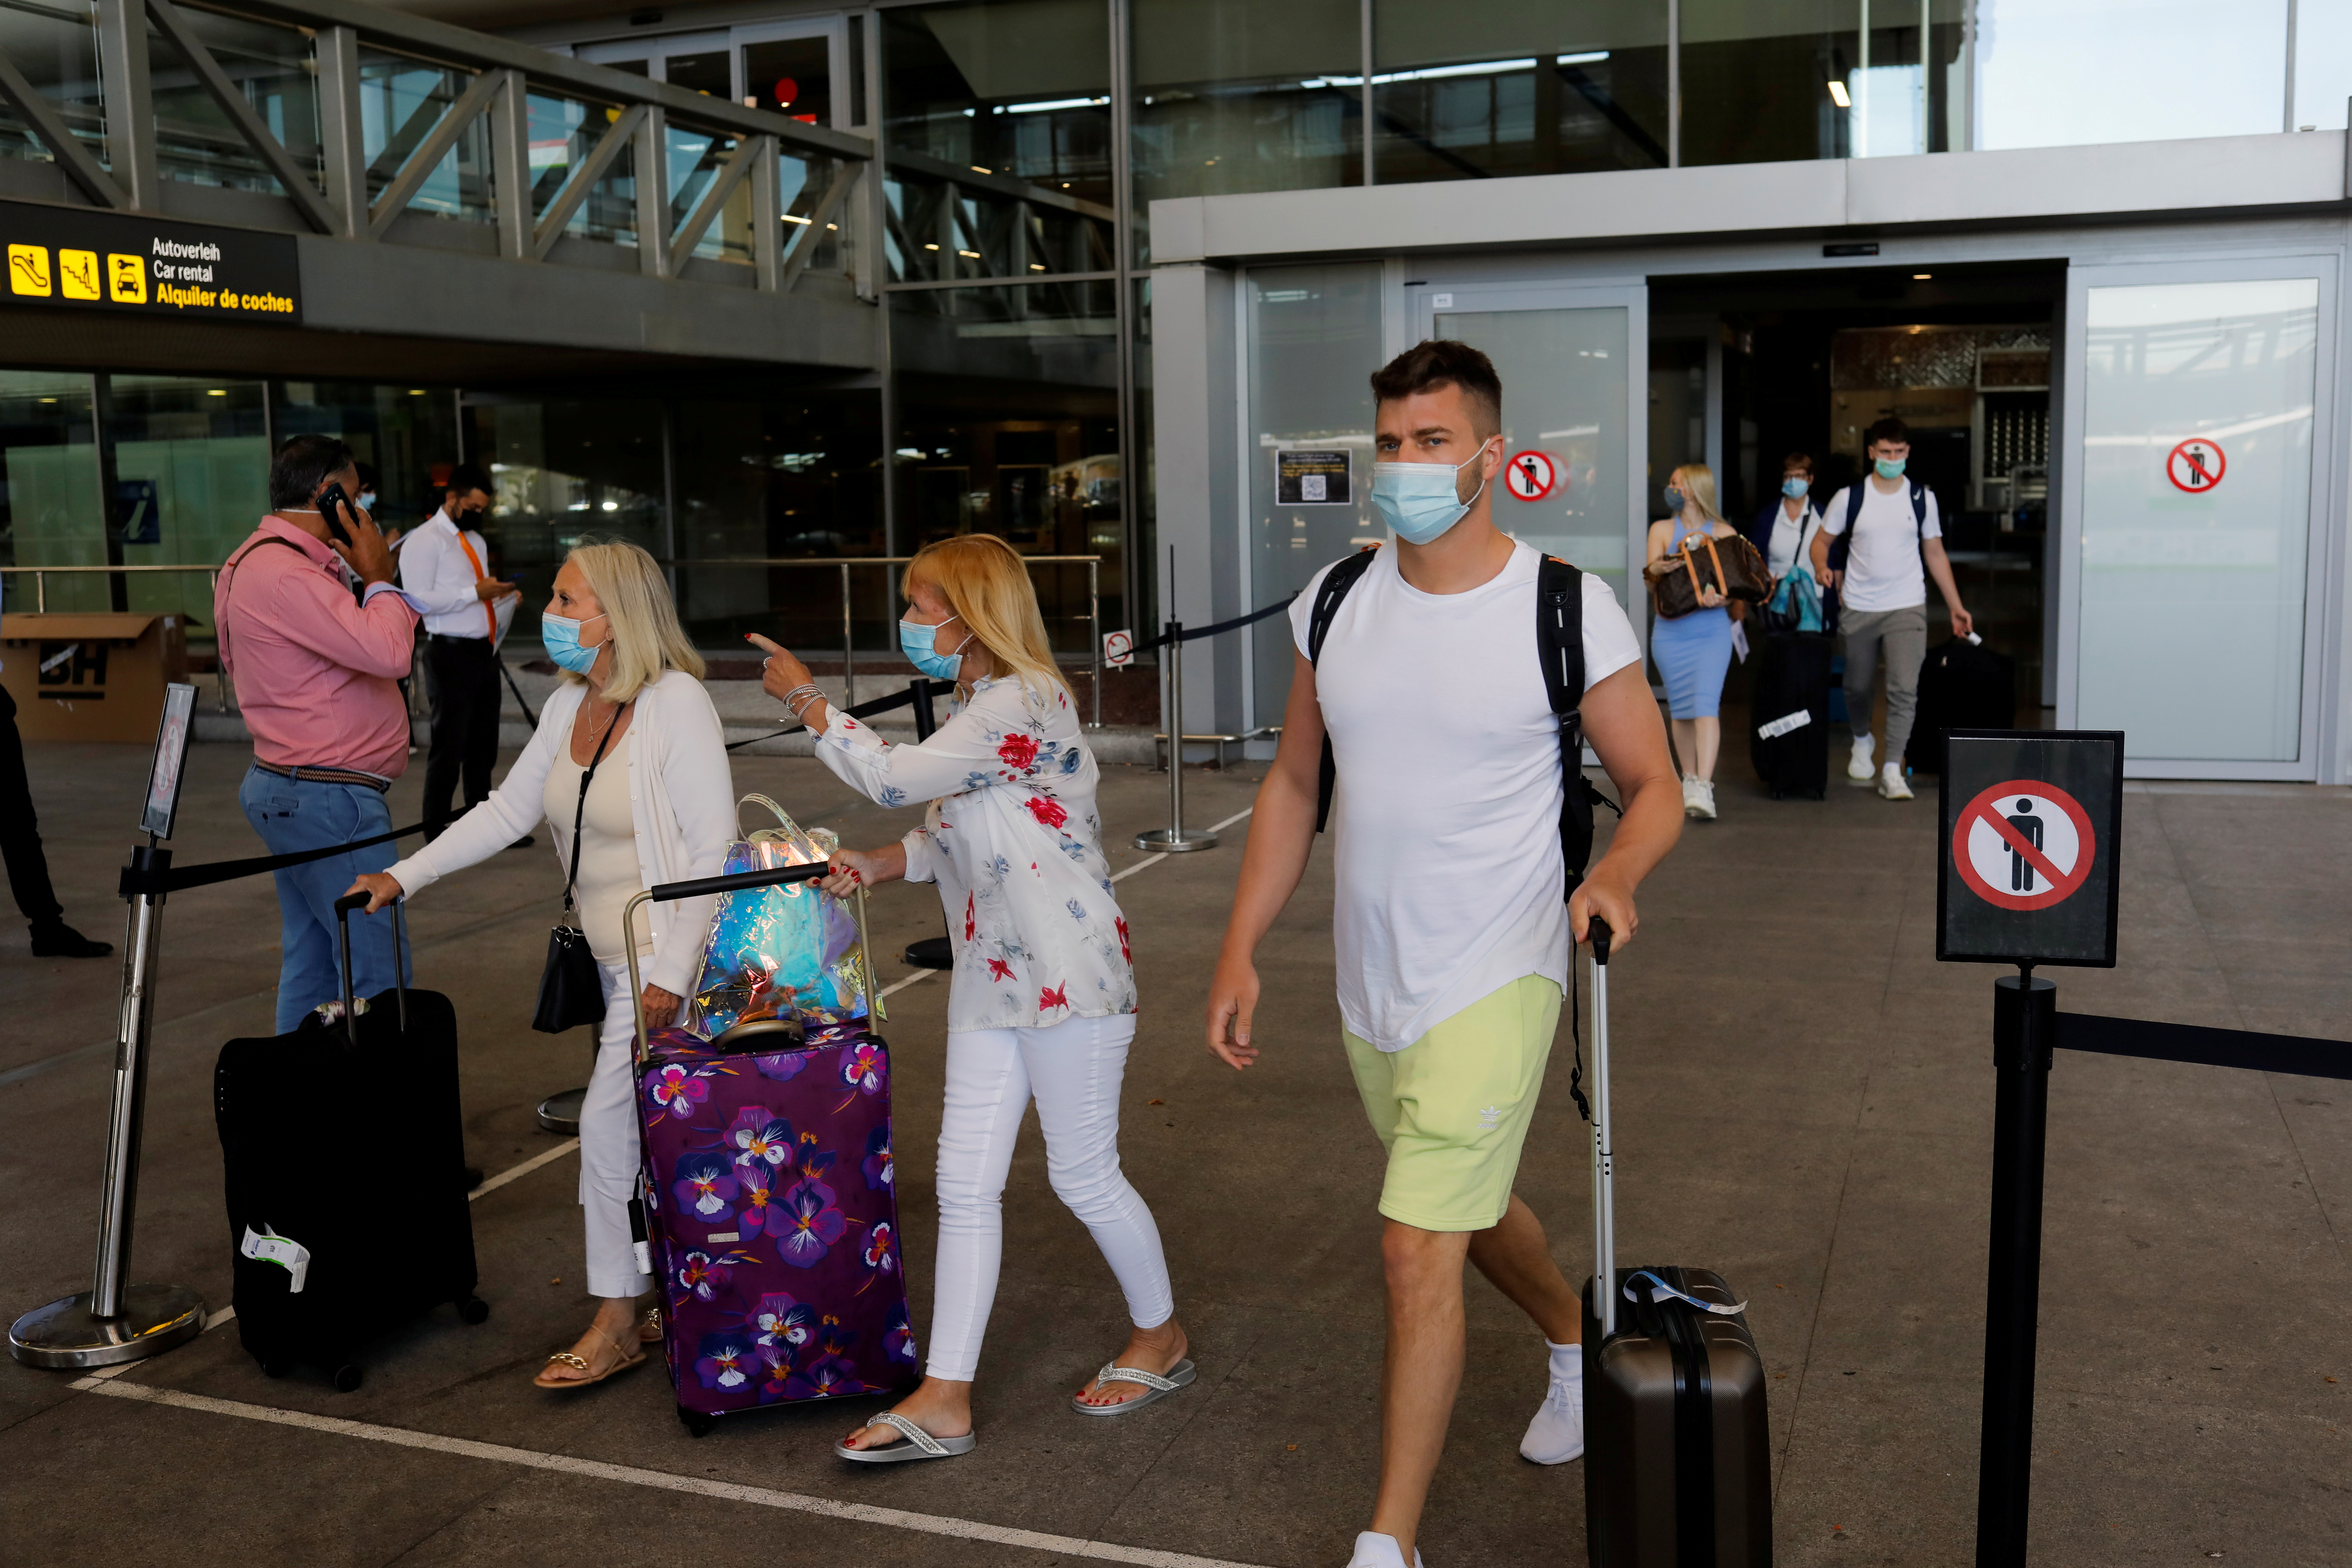 Tourists wearing protective face masks walk with their luggage as they arrive at Malaga-Costa del Sol Airport, in Malaga, Spain, June 7, 2021.